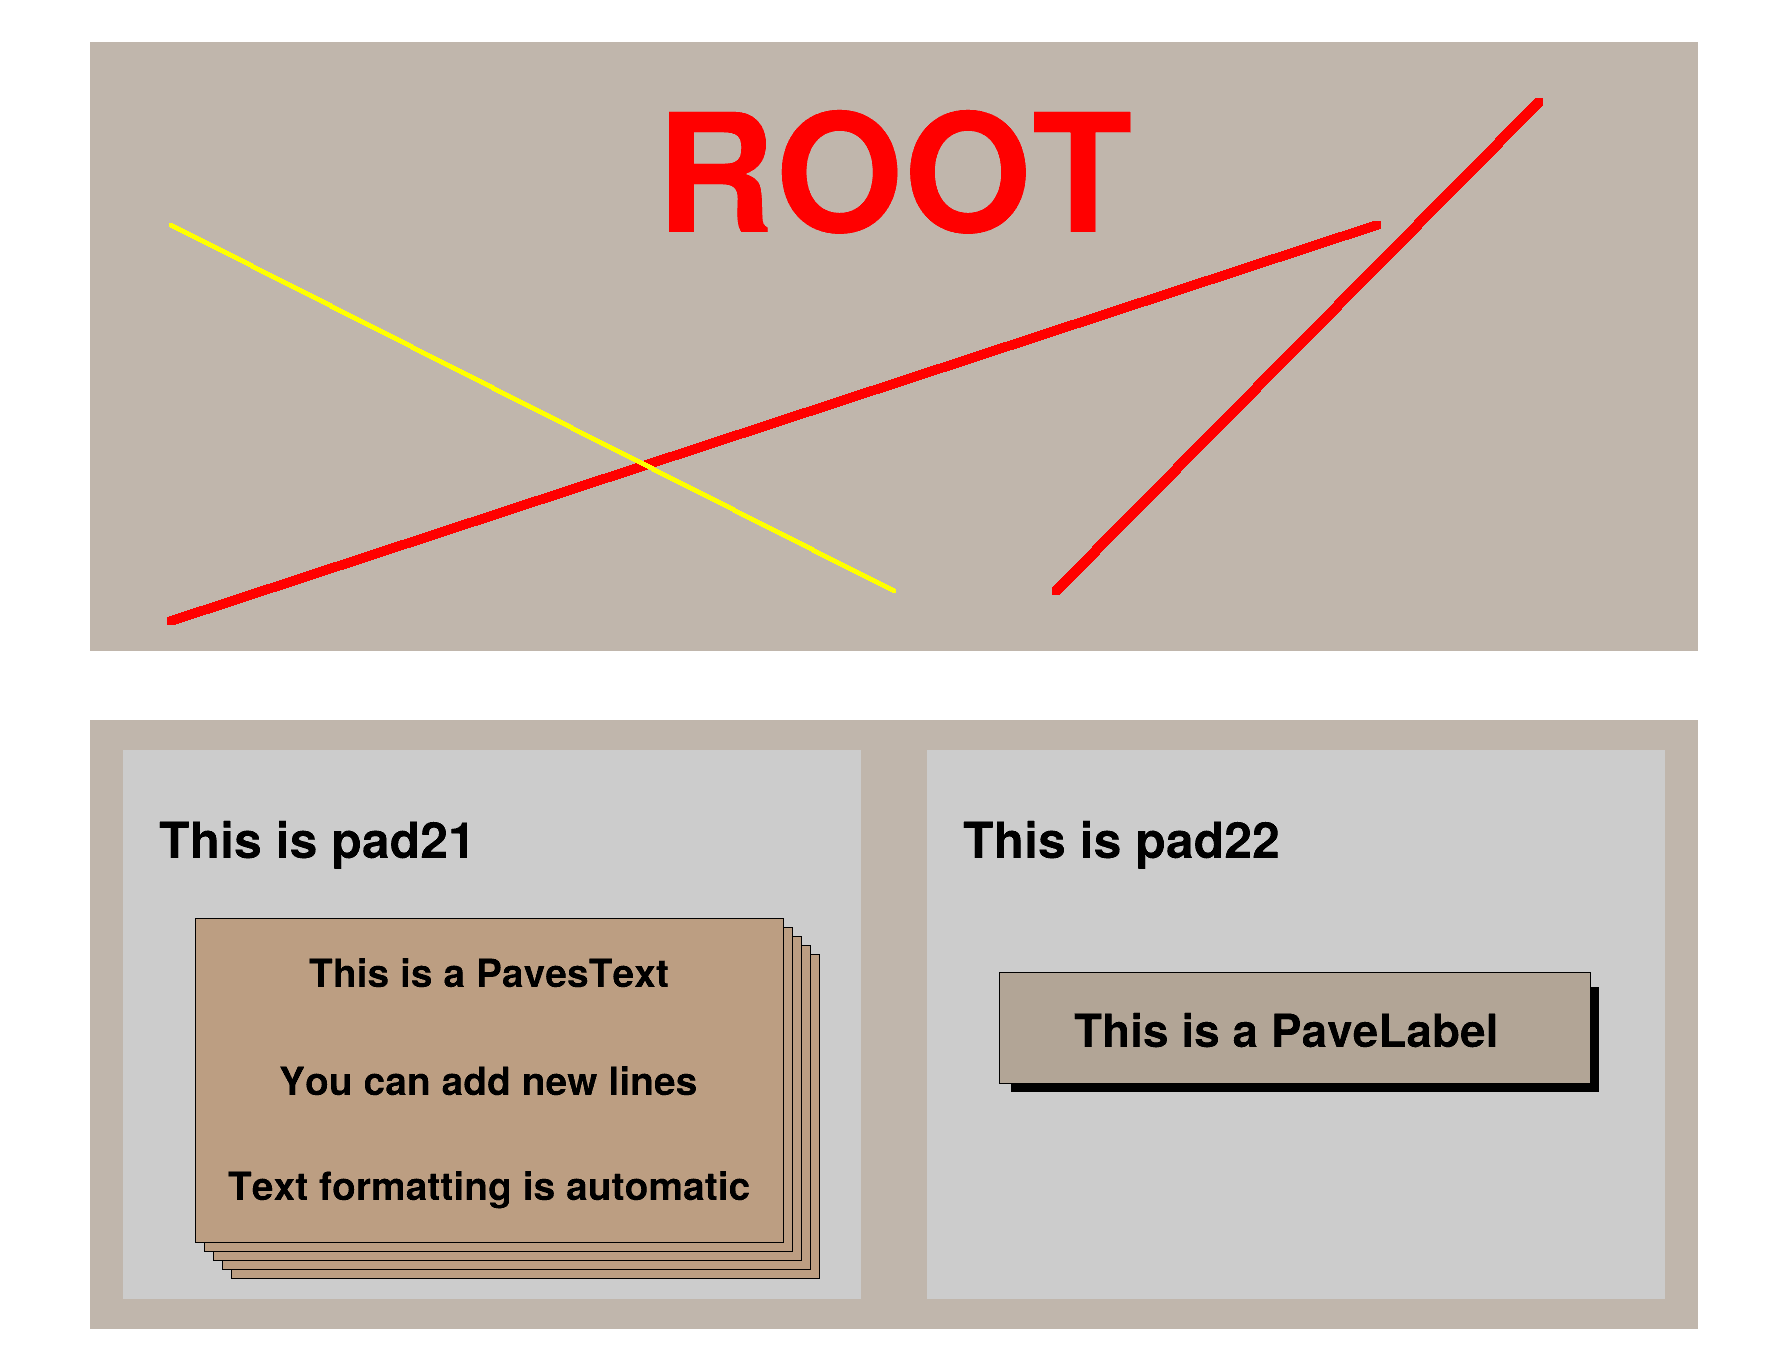 Root message. Root CERN вертикальная линия на графике. CERN root gap x-Axis. Root source material. Root CERN write text on Page.